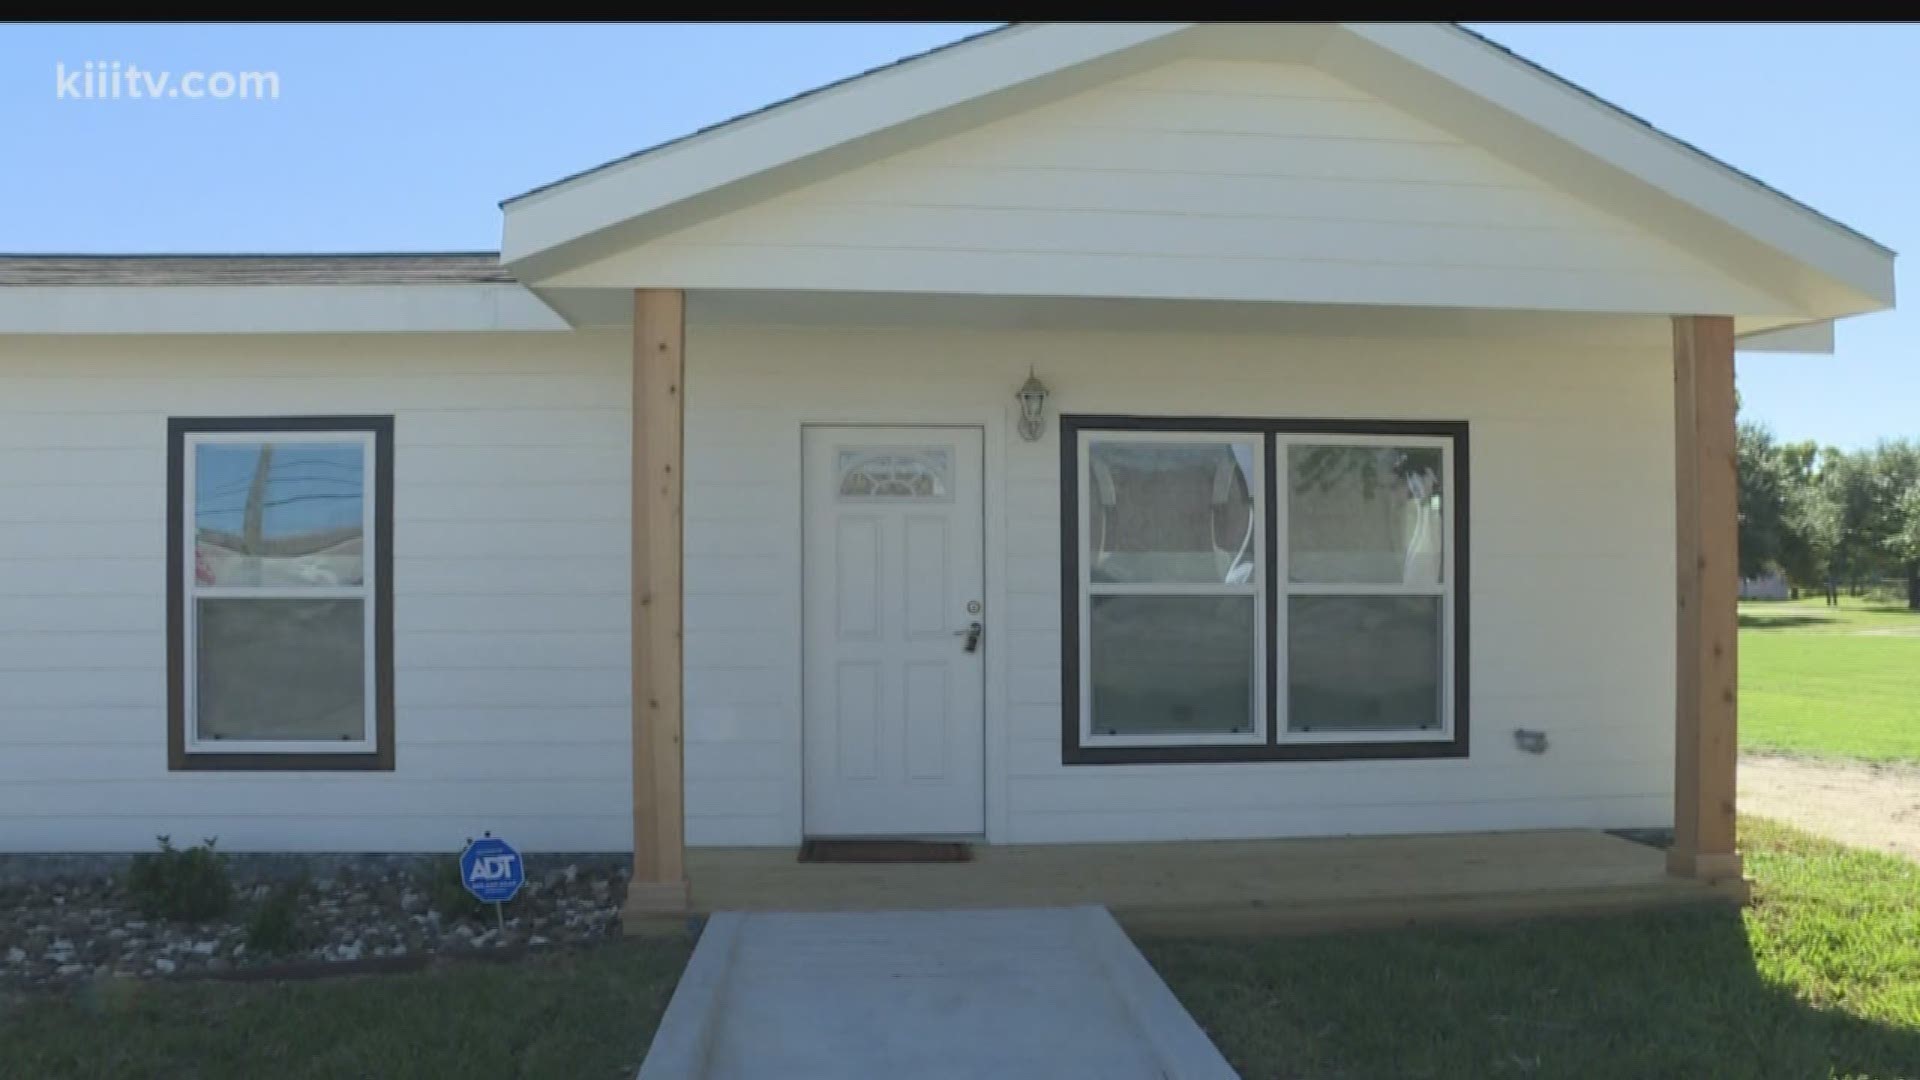 After recognizing the severe lack of affordable housing in this city, the Corpus Christi Housing Authority has taken action.